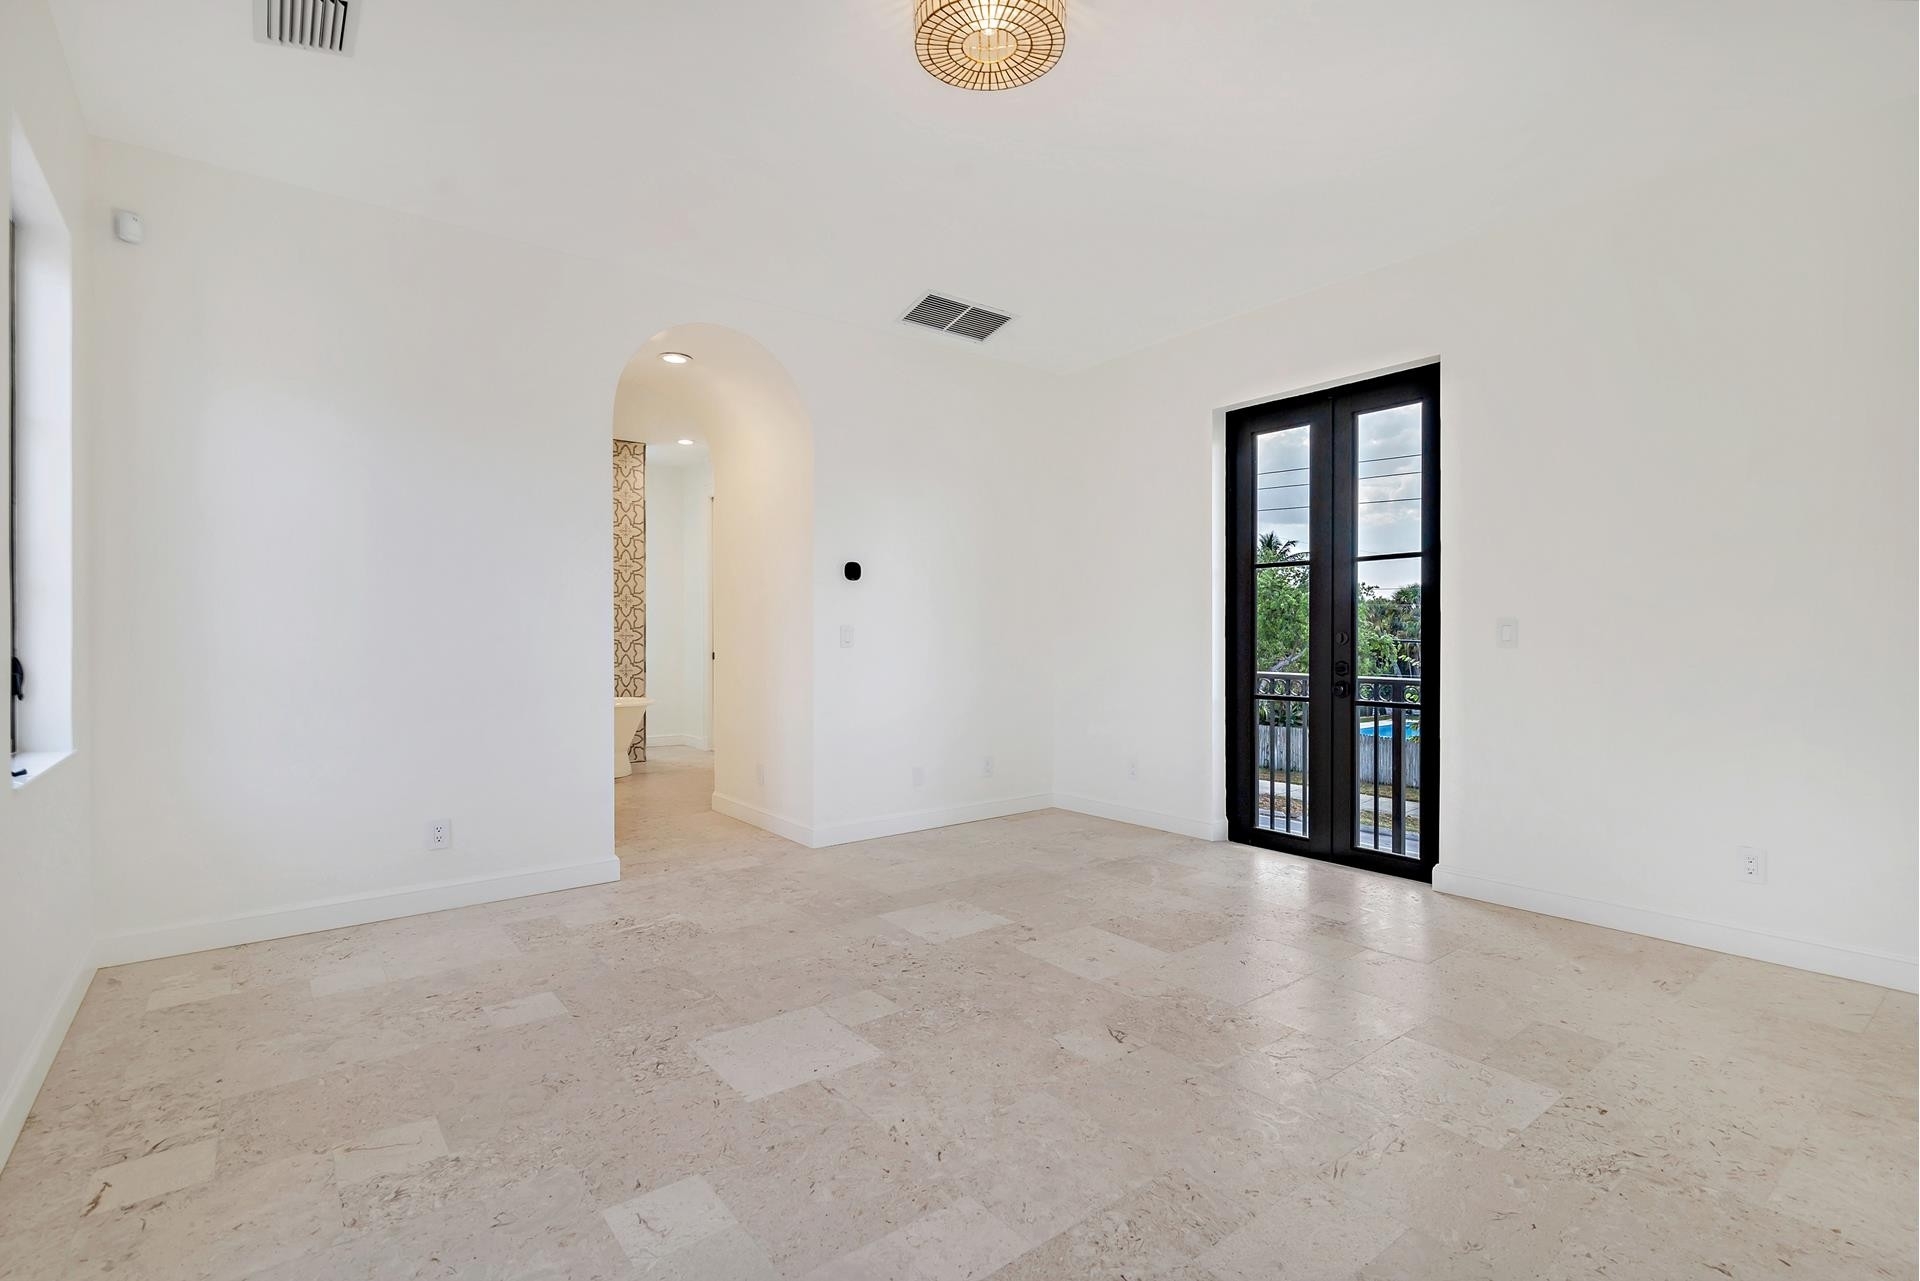 Single Family Home for Sale at South End, West Palm Beach, FL 33405